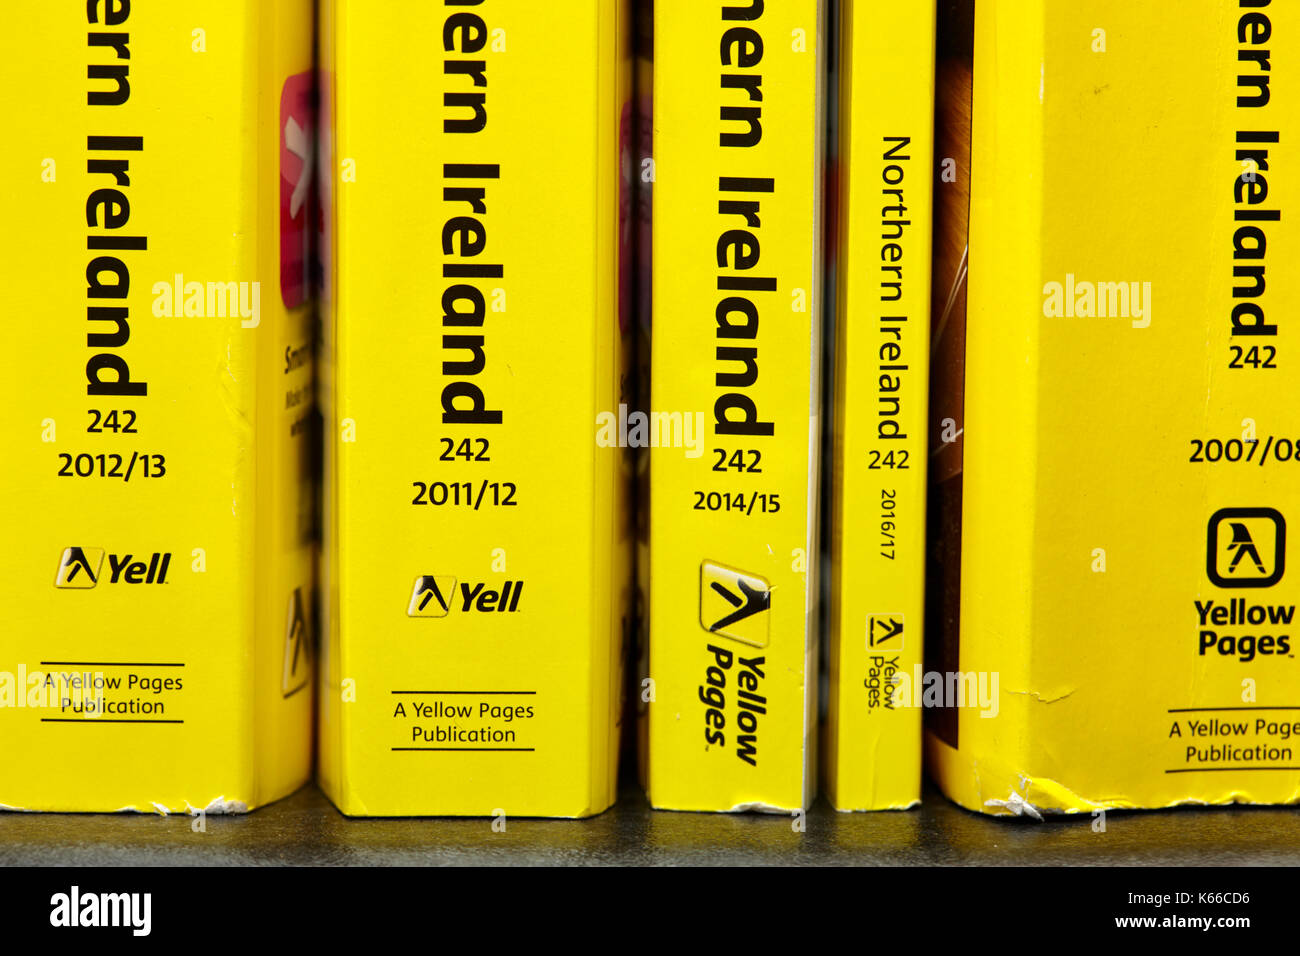 decreasing size later smaller thinner versions of the yellow pages classified telephone directory paper edition uk Stock Photo